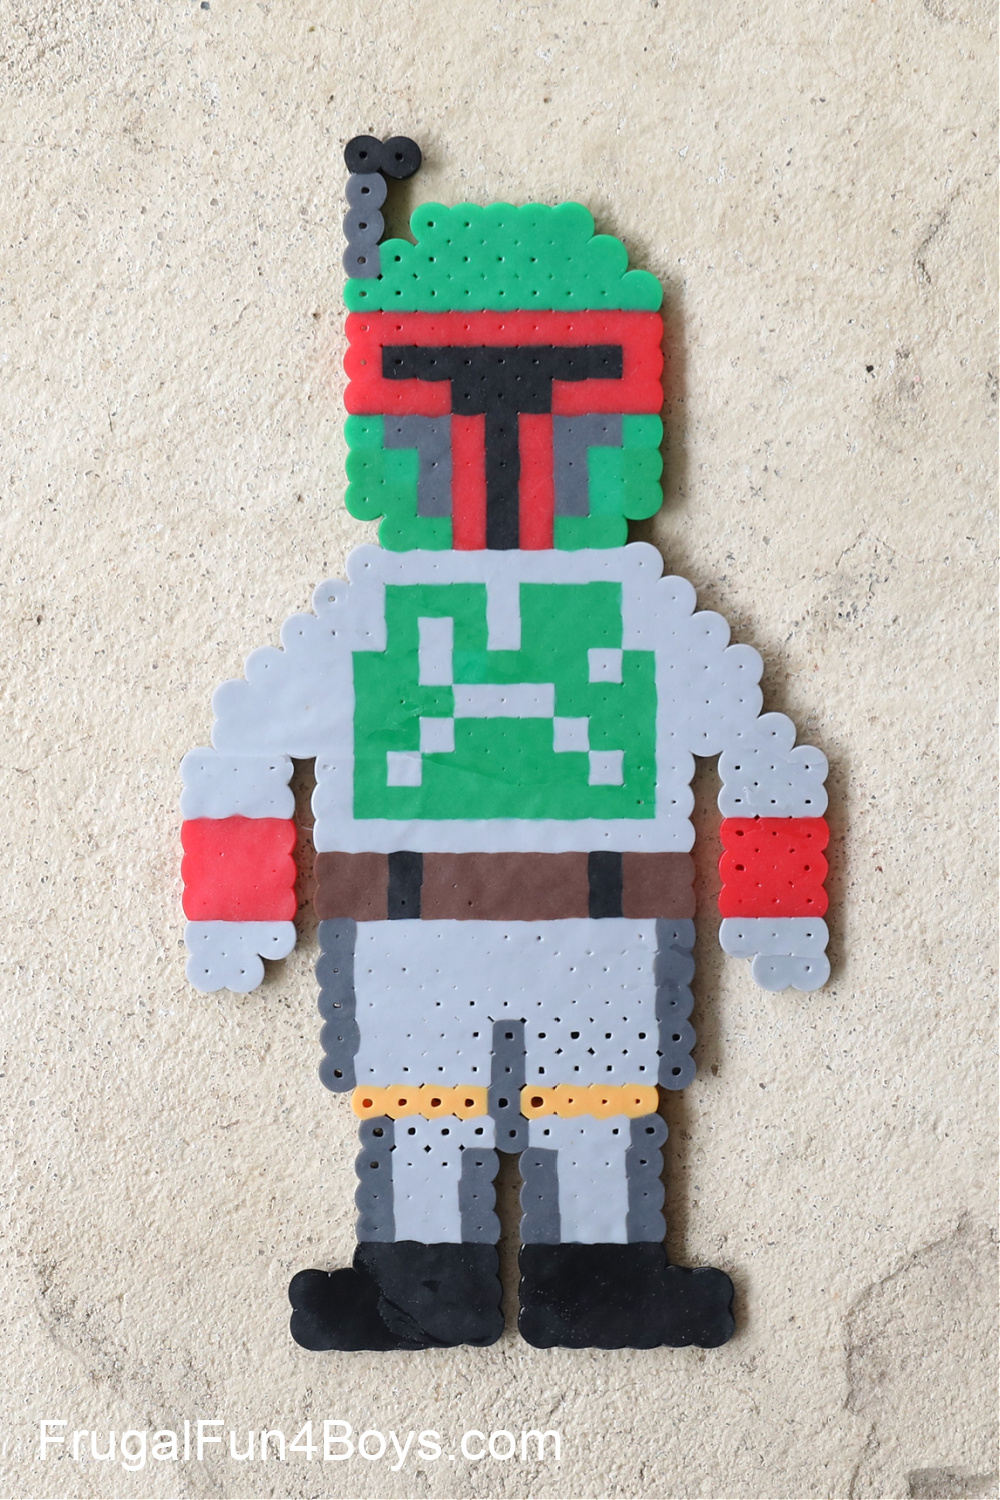 Star Wars Perler Beads Patterns - Frugal Fun For Boys and Girls